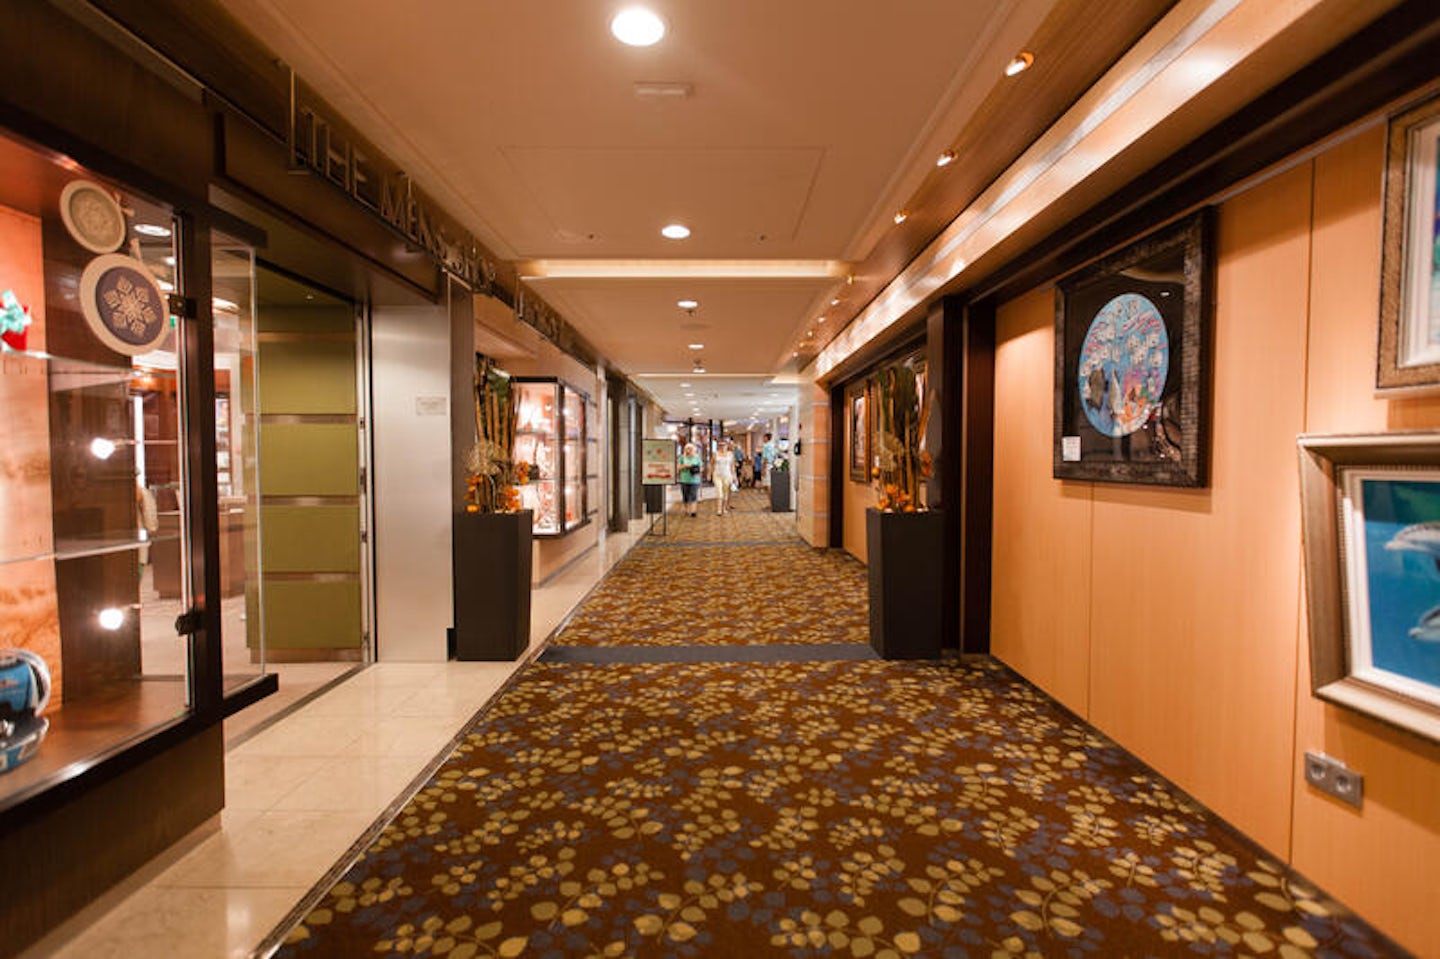 Galleria Boutiques on Celebrity Silhouette